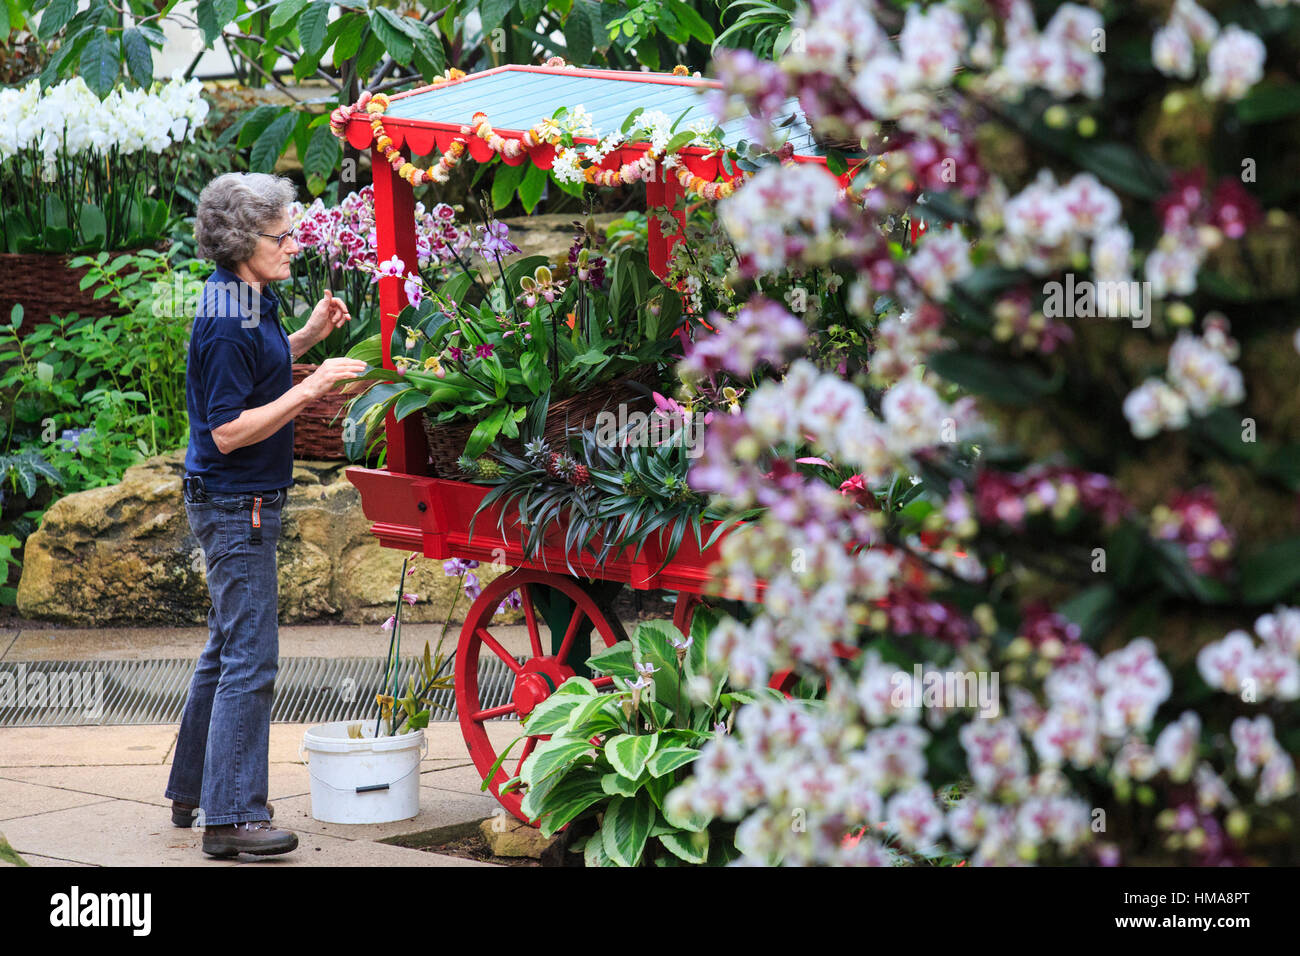 London, UK. 2nd Feb, 2017. Press preview of the Kew Gardens 2017 Orchids Festival which opens to the public on Saturday, 4 February in the Princess of Wales Conservatory. The 22nd annual Kew Orchid Festival is a colourful celebration of India's vibrant plants and culture. It took Kew staff and volunteers 1,600 hours to create. 3,600 orchids are on display until 5 March 2017. Credit: Vibrant Pictures/Alamy Live News Stock Photo